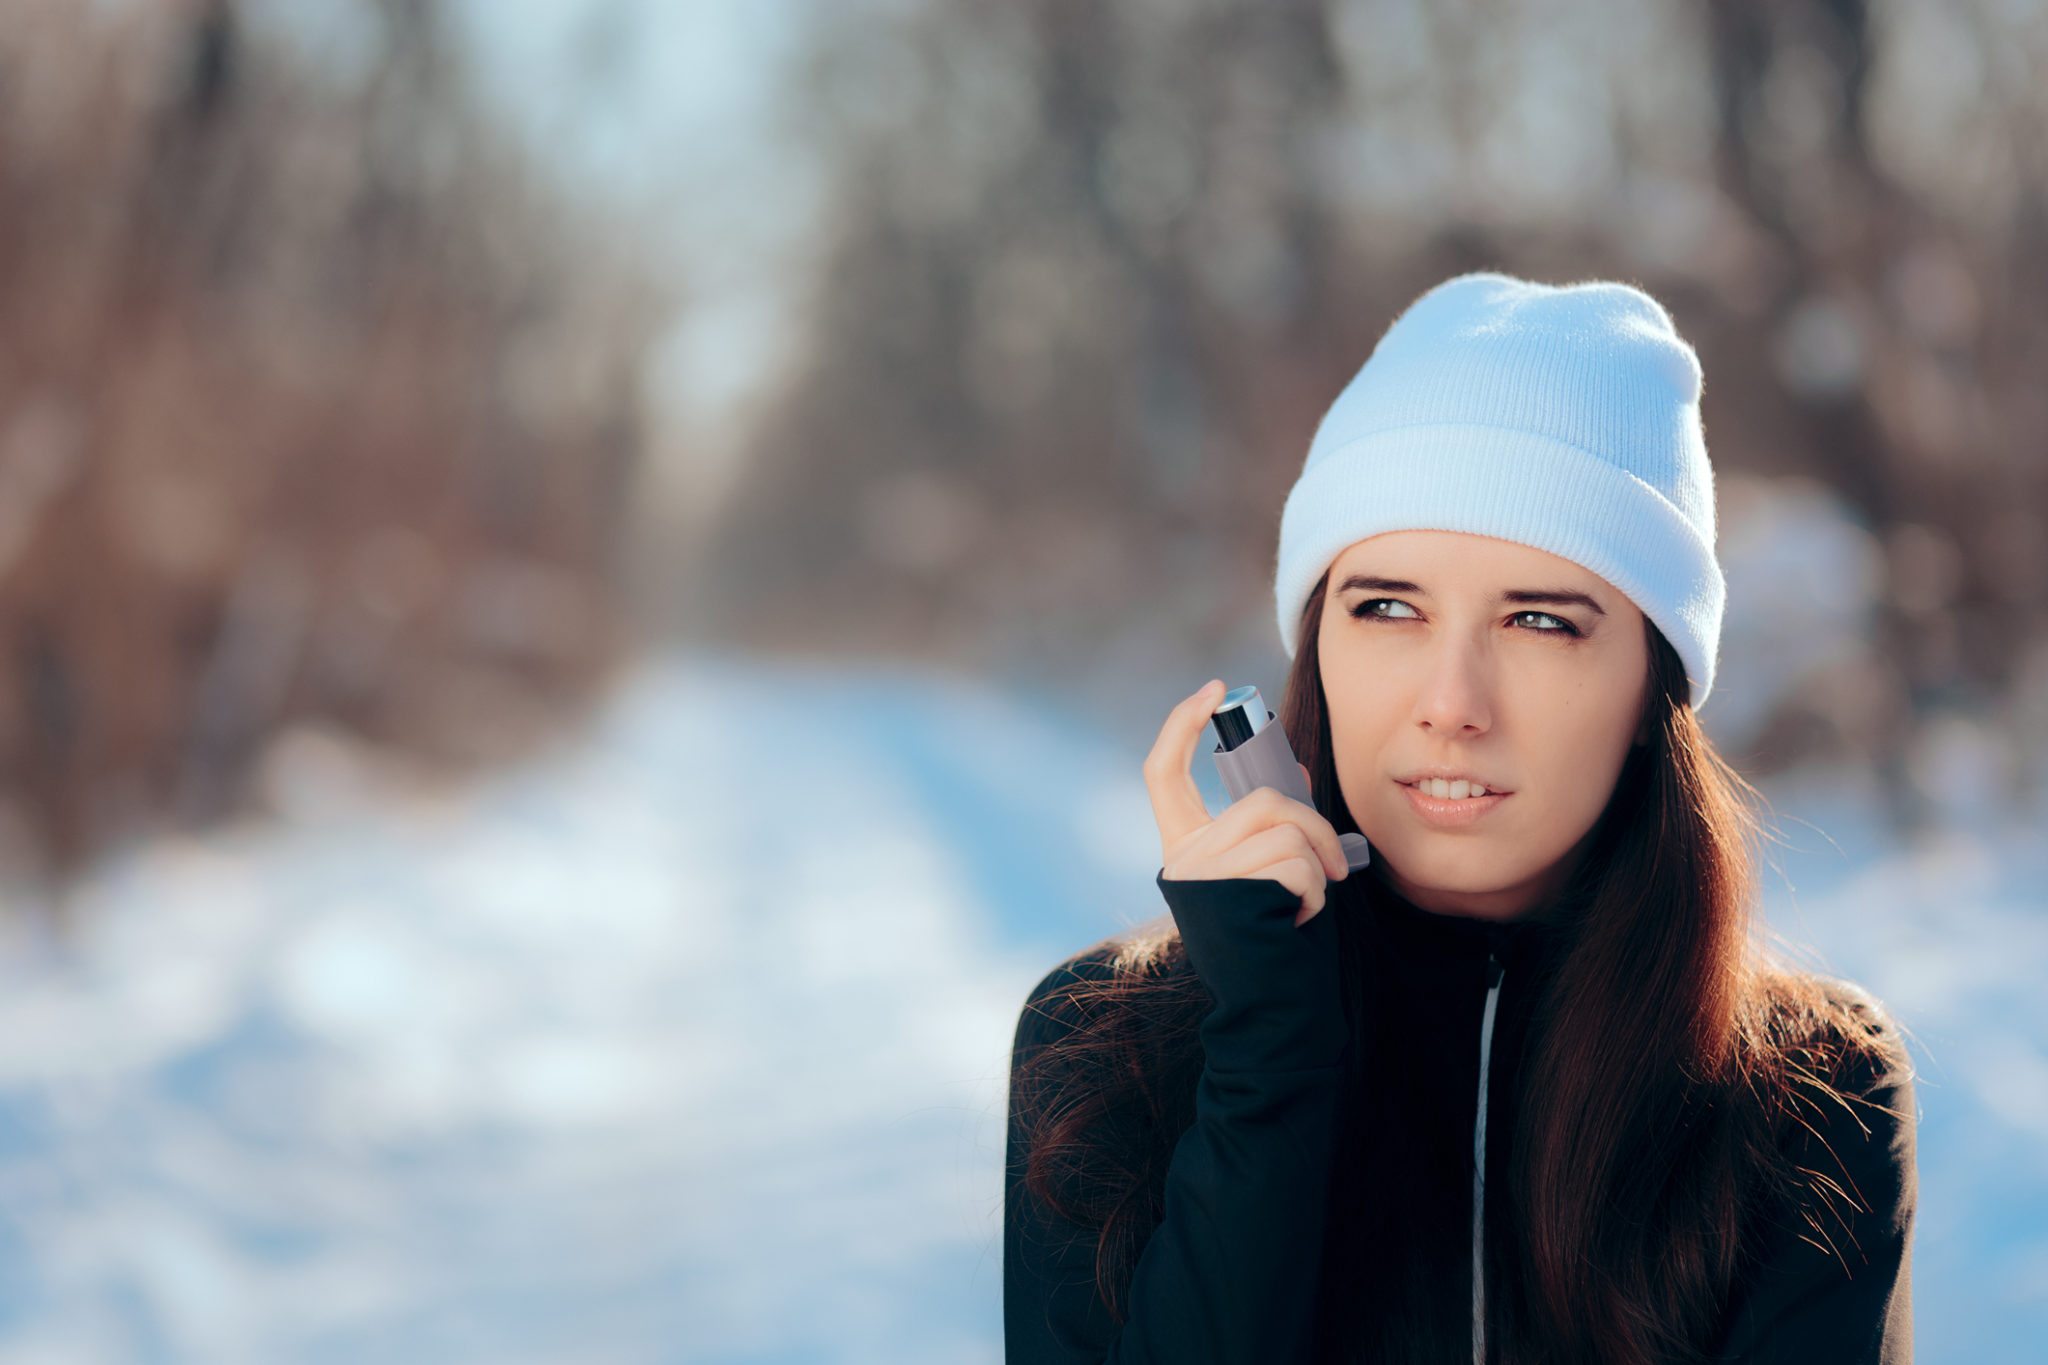 Do Cold Temperatures Trigger Your Asthma?